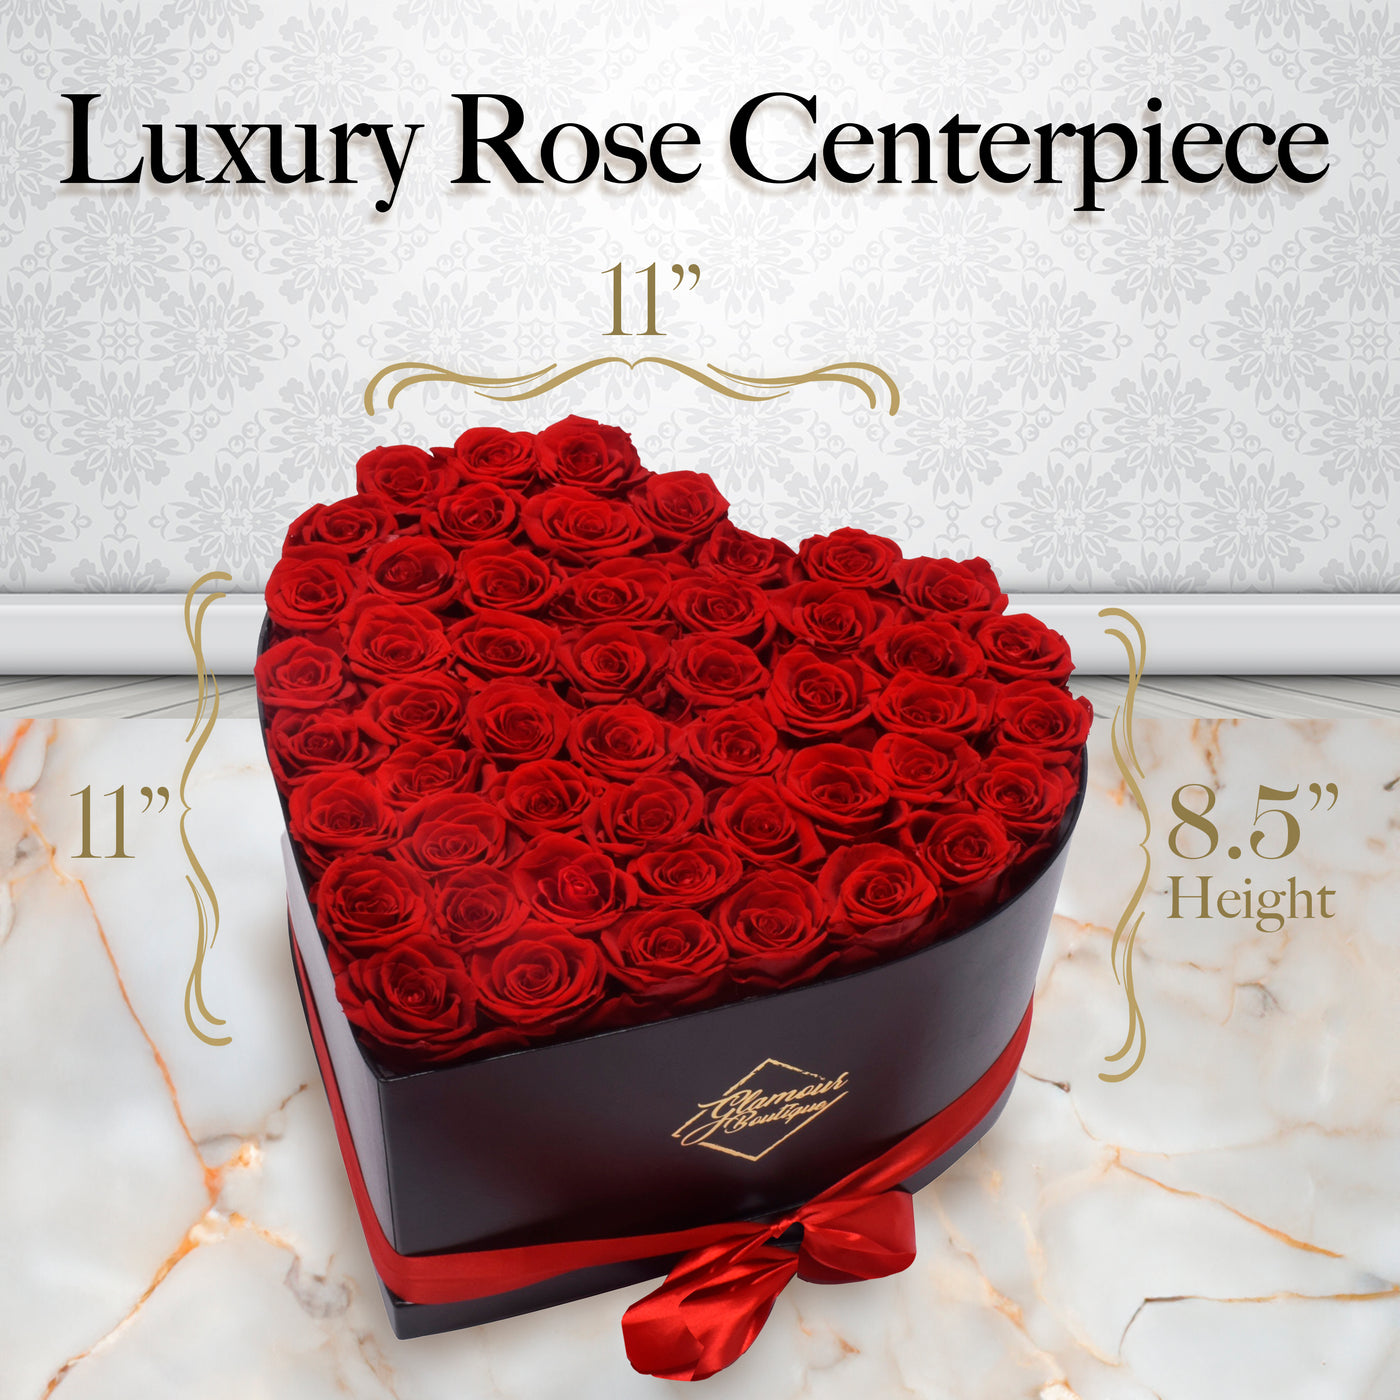 Immortal Love Heart Box | 50 Red  Roses